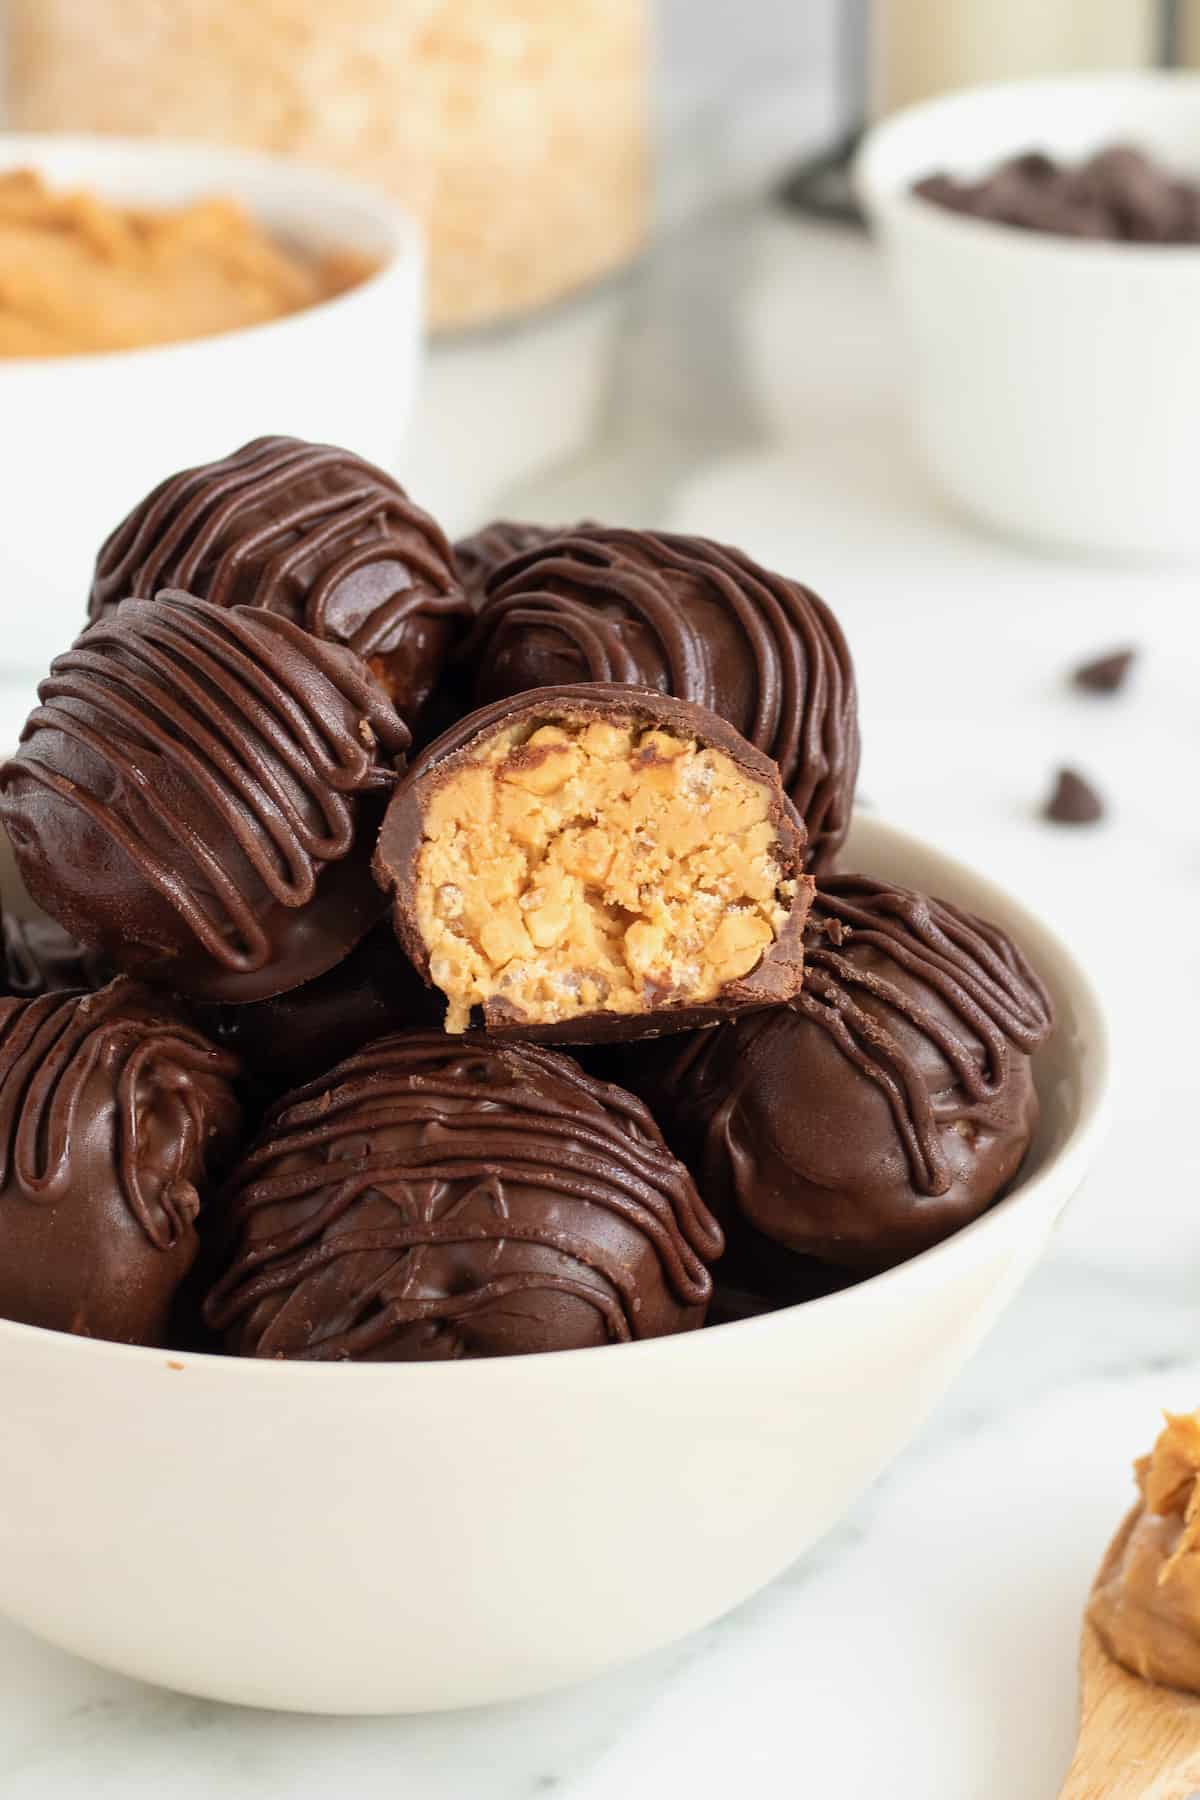 Chocolate Peanut Butter Balls by The BakerMama